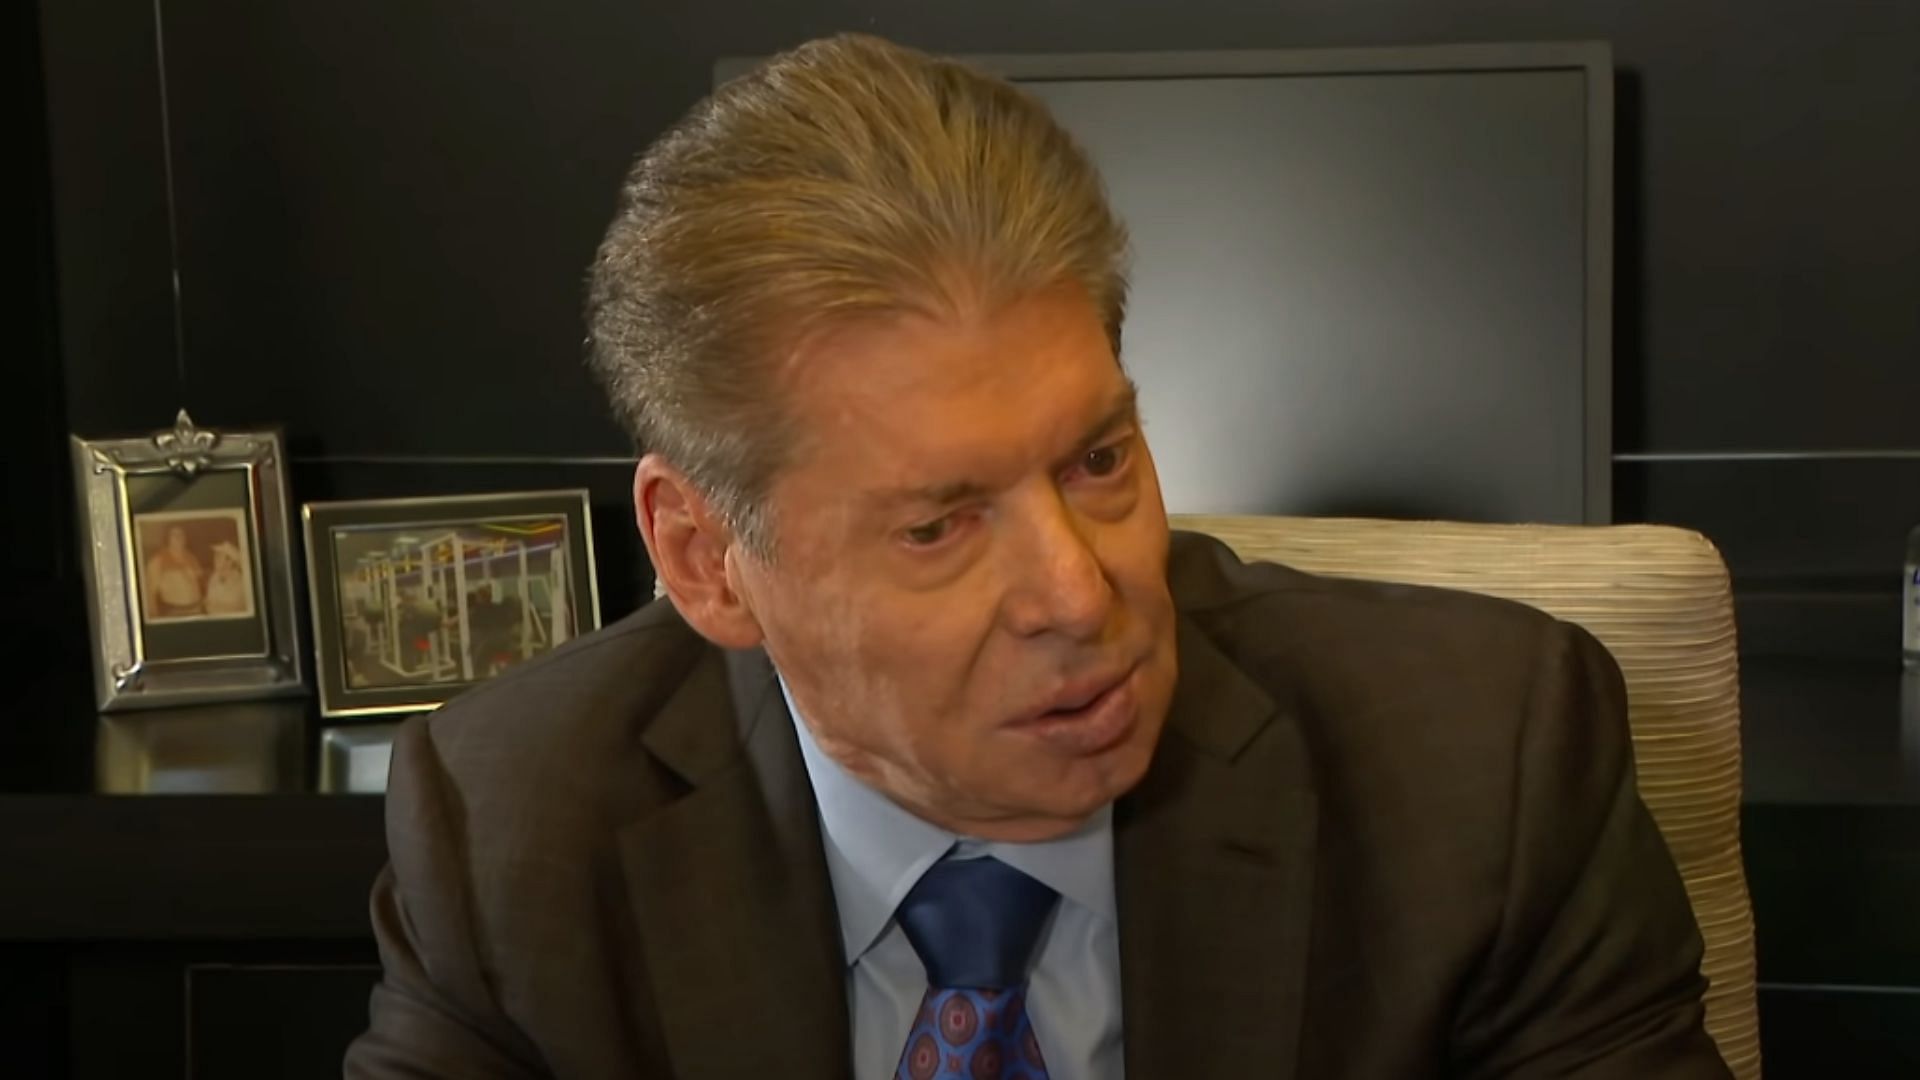 Former WWE Chairman and CEO Vince McMahon